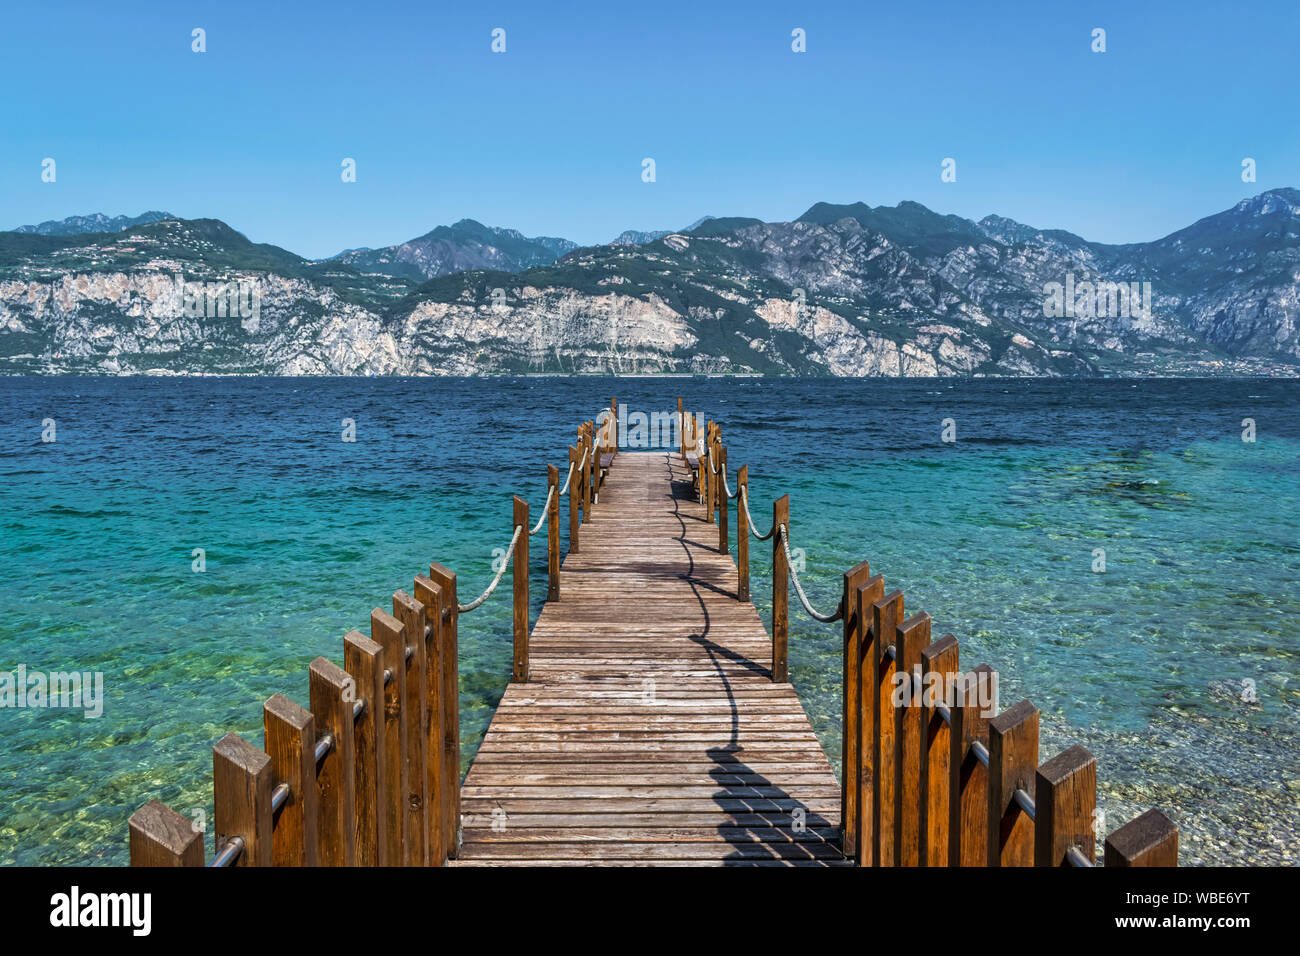 Wooden dock jutting out into the turquosie water of Lake Garda Stock Photo